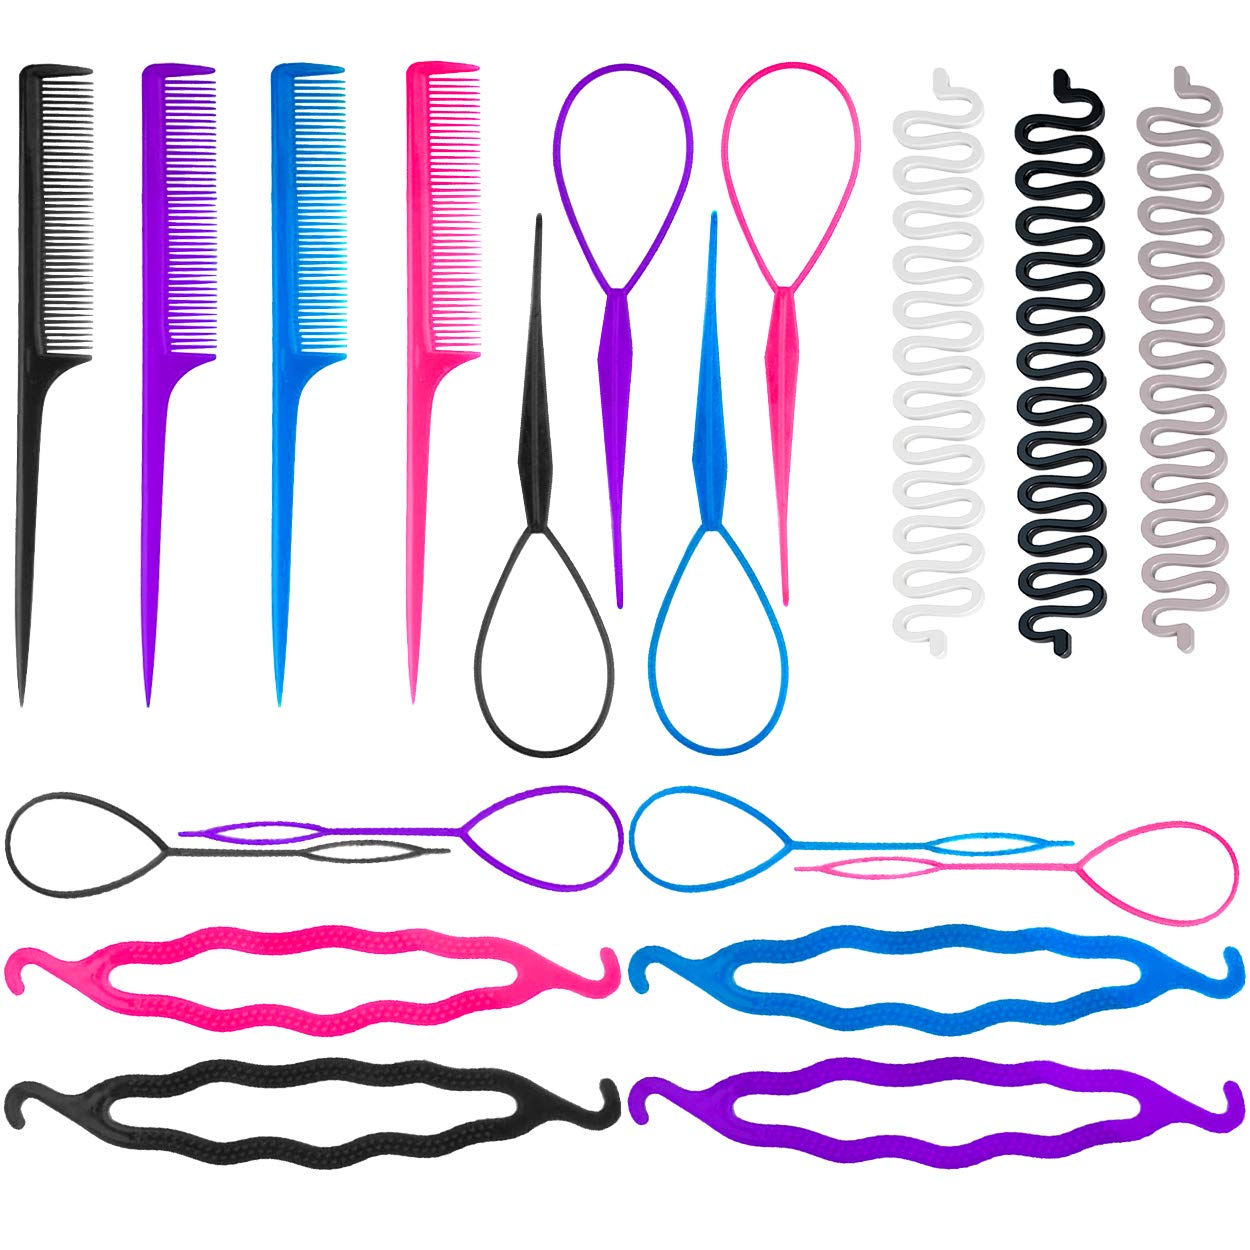 Topsy Tail Hair Styling Tool ，Hair braiding tool,Hair Styling Accessory for $4+